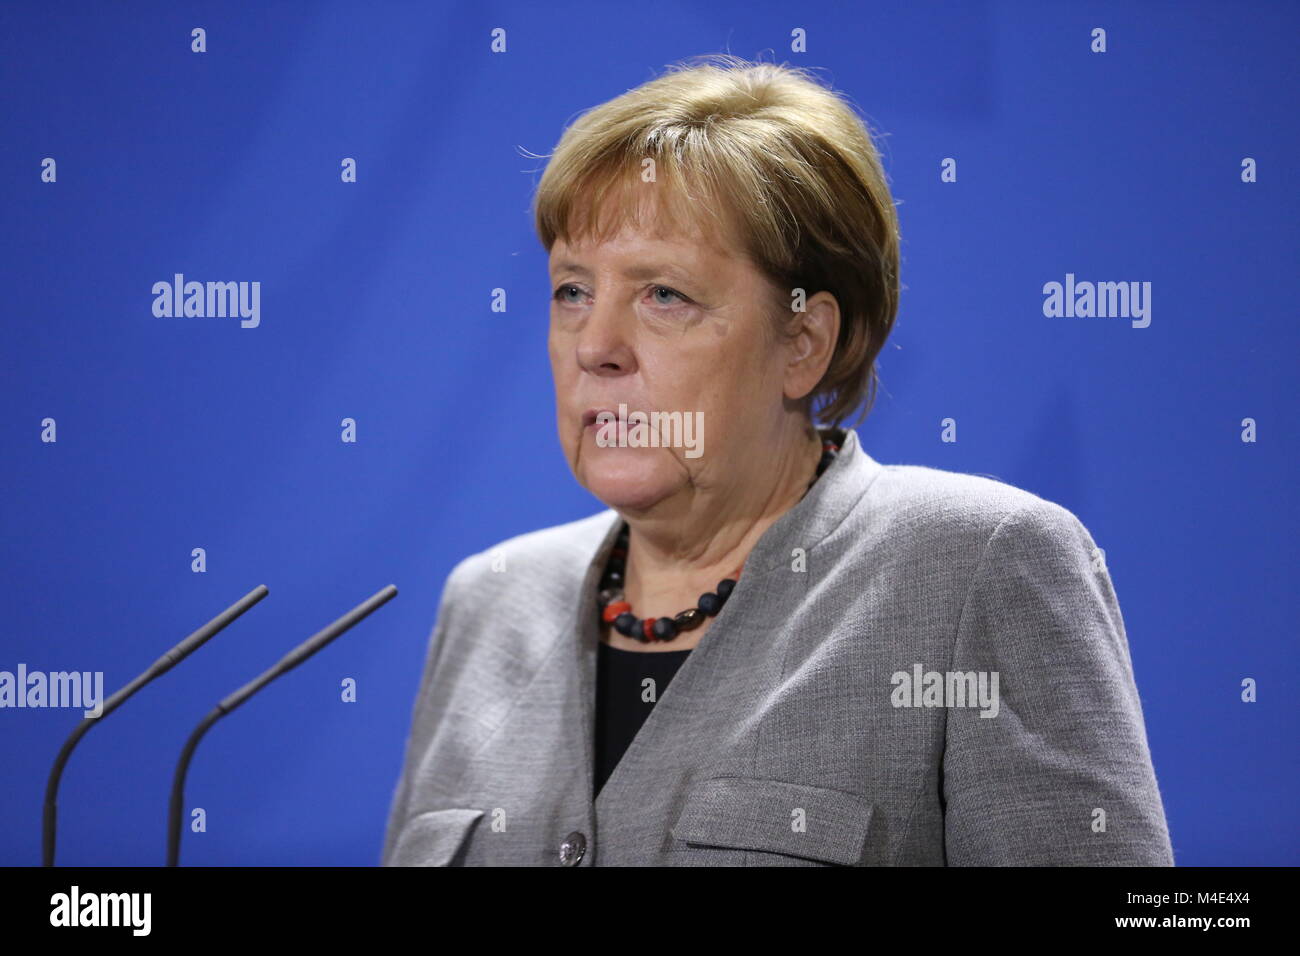 Berlin, Germany. 15th Feb, 2018. Berlin: Berlin: The photo shows German Chancellor Angela Merkel on the podium at the press conference in the Federal Chancellery. Credit: Simone Kuhlmey/Pacific Press/Alamy Live News Stock Photo